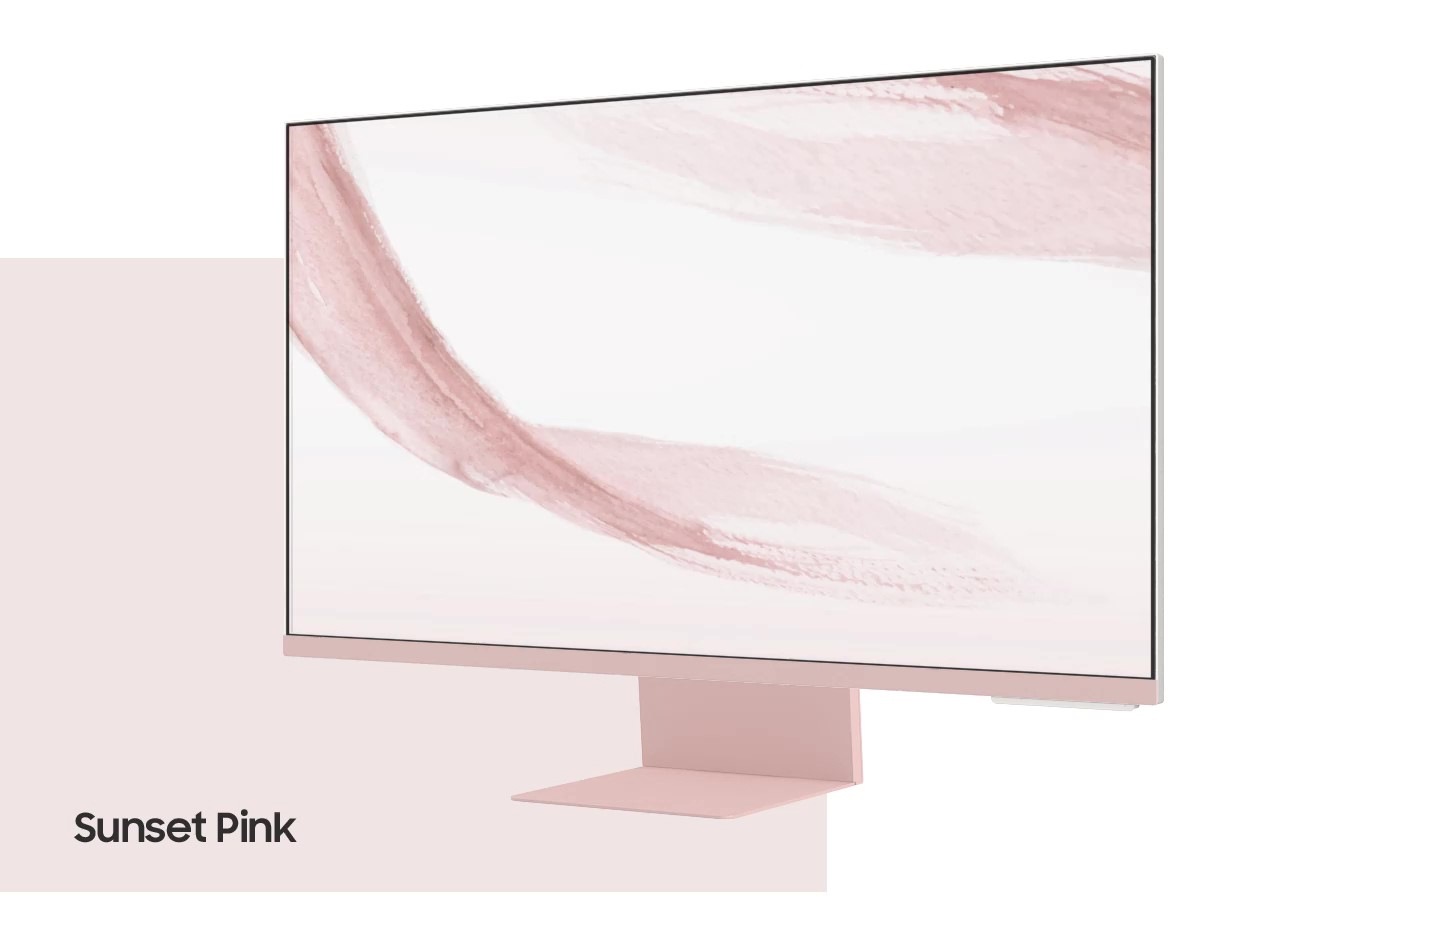 A monitor floats while spinning in 360-degree circles. As the monitor spins it changes colors. The text on the bottom left updates from "Sunset Pink" to "Spring Green" to "Daylight Blue" to "Warm White" as the colors change the.